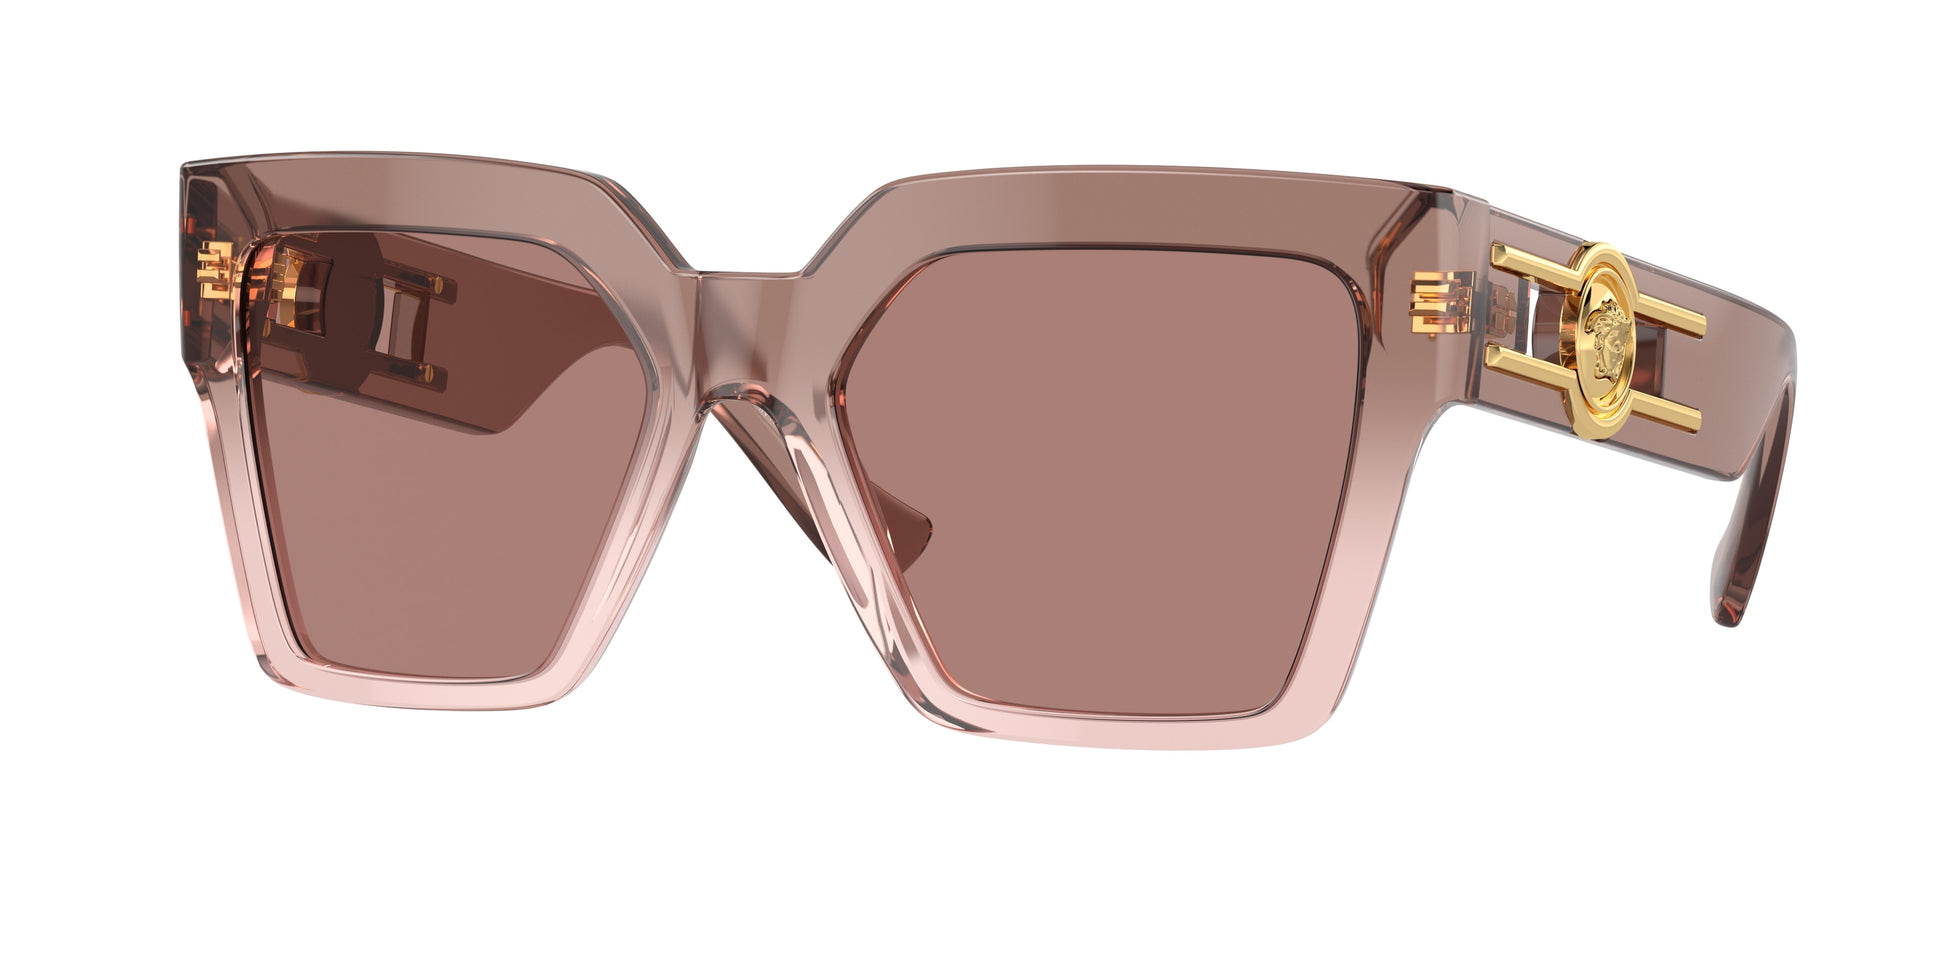 Versace VE4458F Butterfly Sunglasses  543573-Brown Transparent 54-135-19 - Color Map Brown